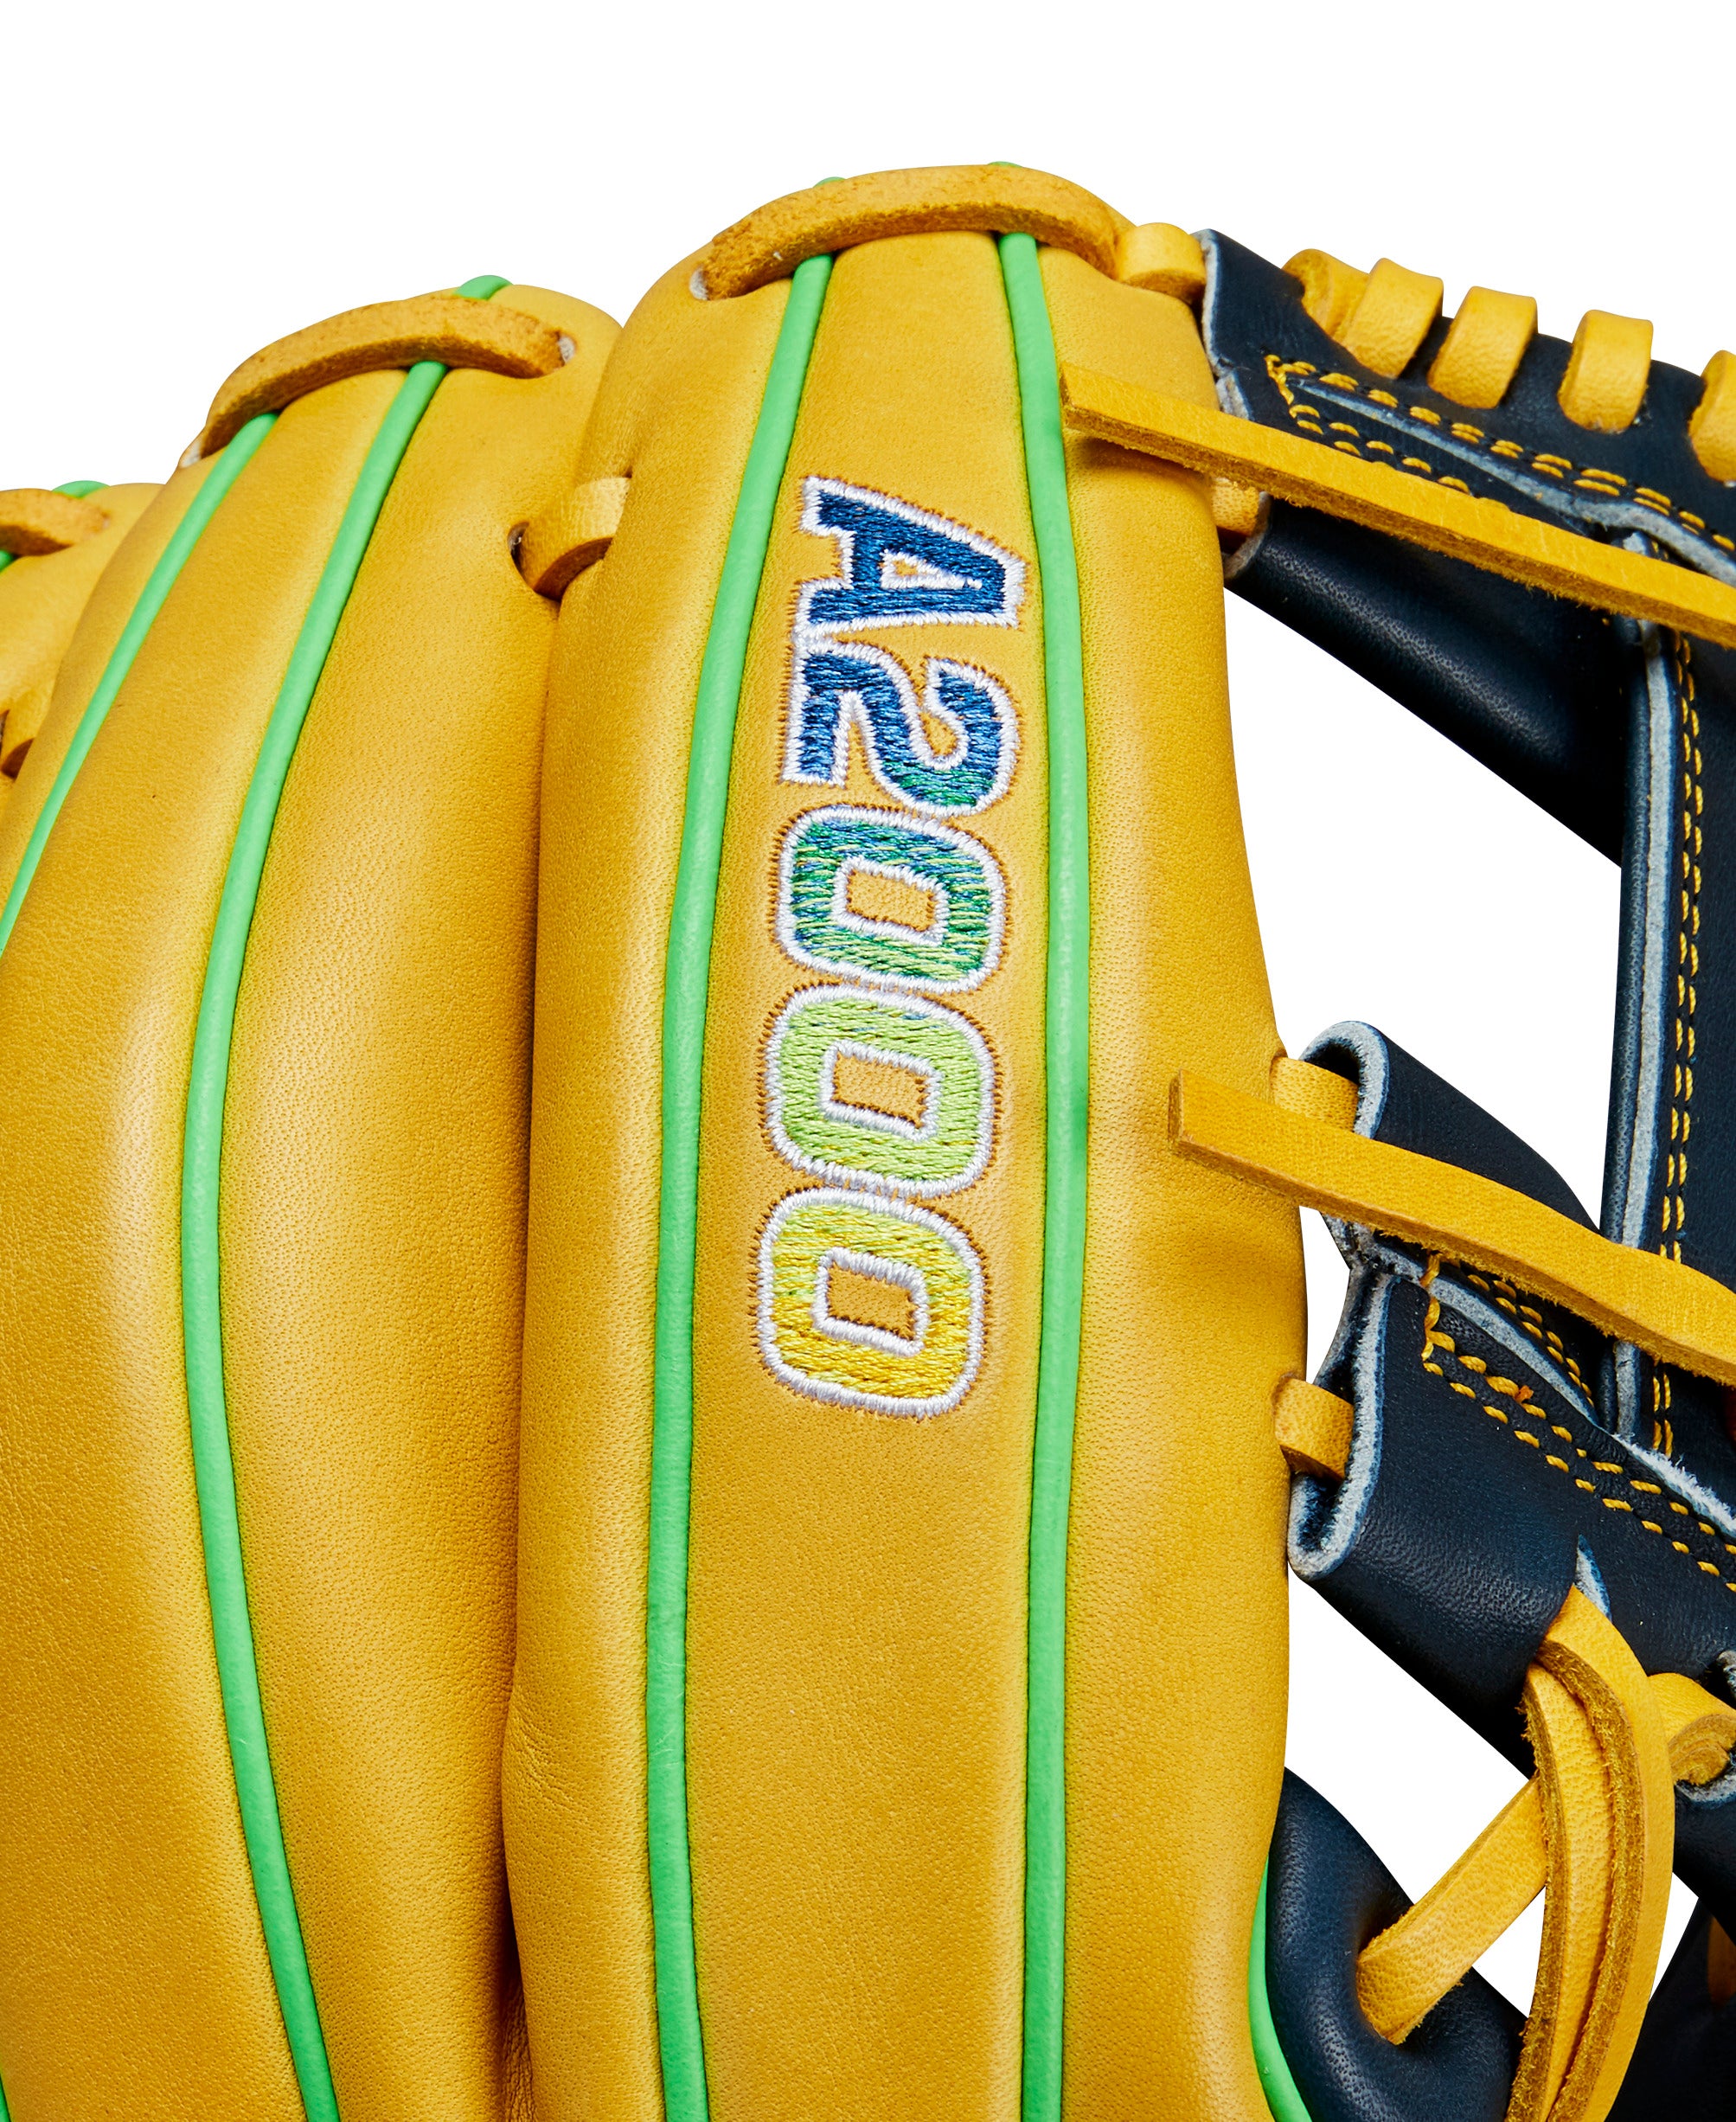 Wilson A2000 Glove of the Month (GOTM) March 2023 Go Bananas 1975 11.75 in